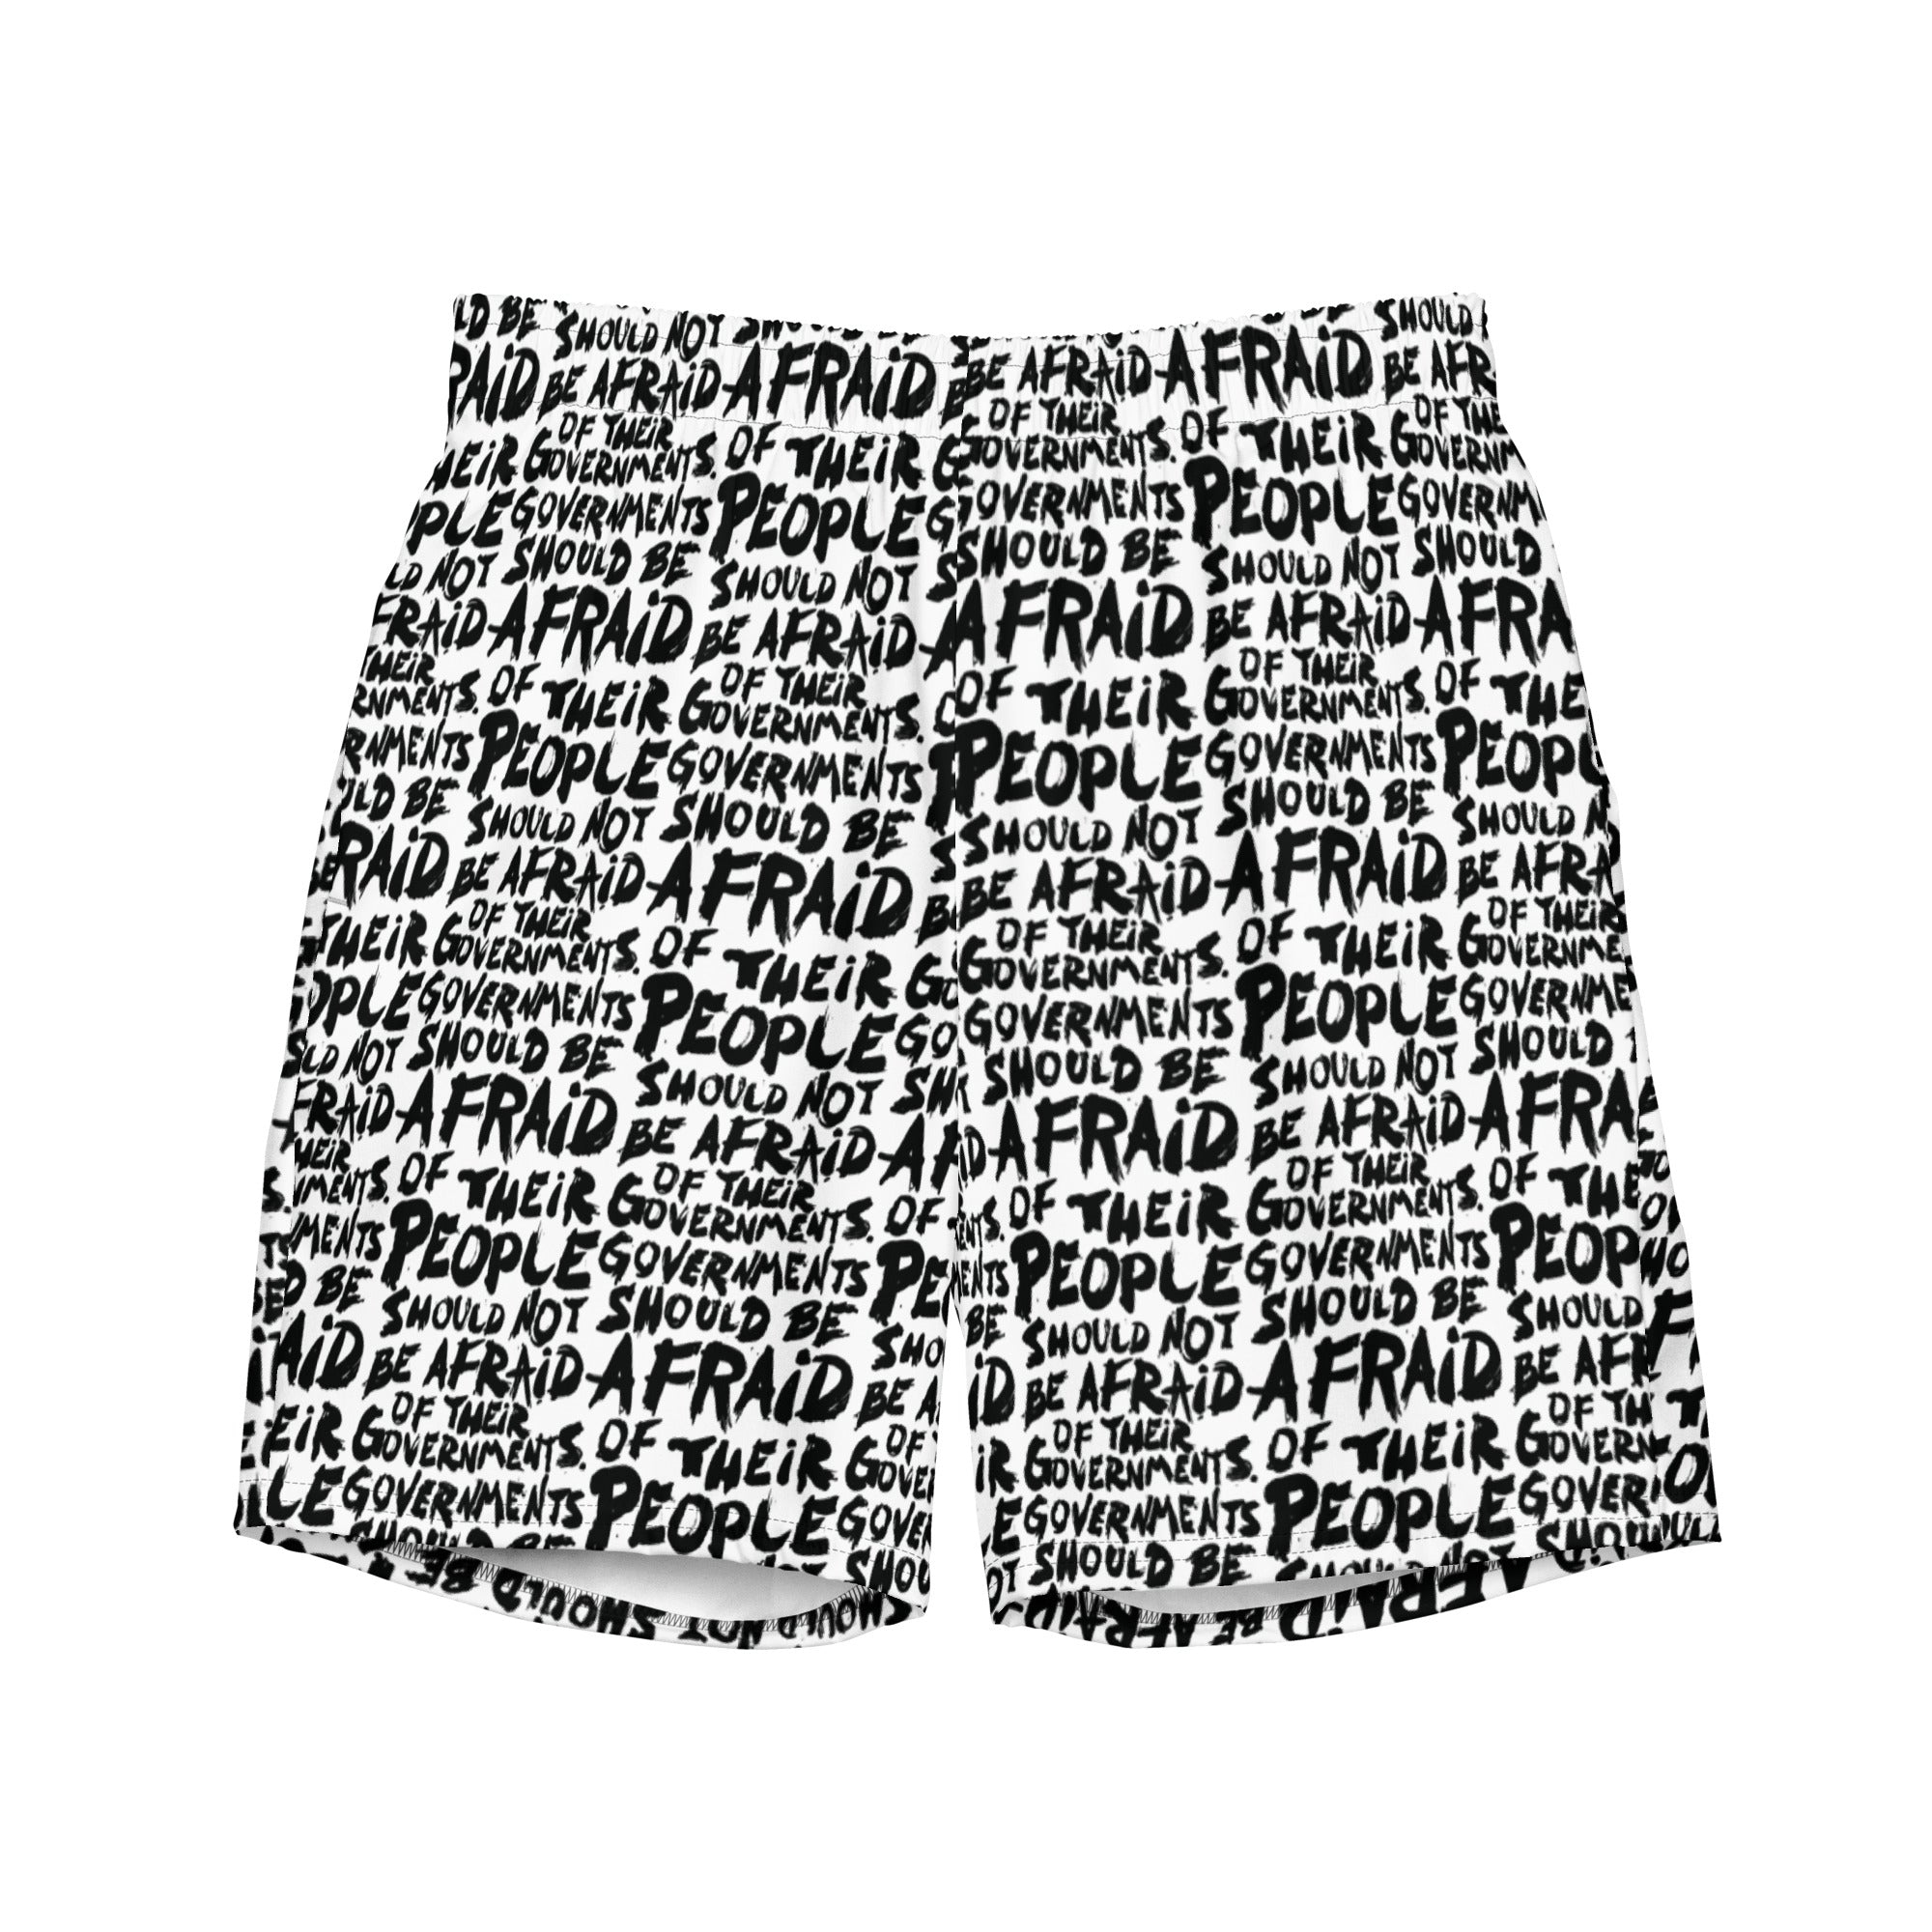 People Should Not Be Afraid of Their Governments Jefferson Quote Men's Swim Trunks